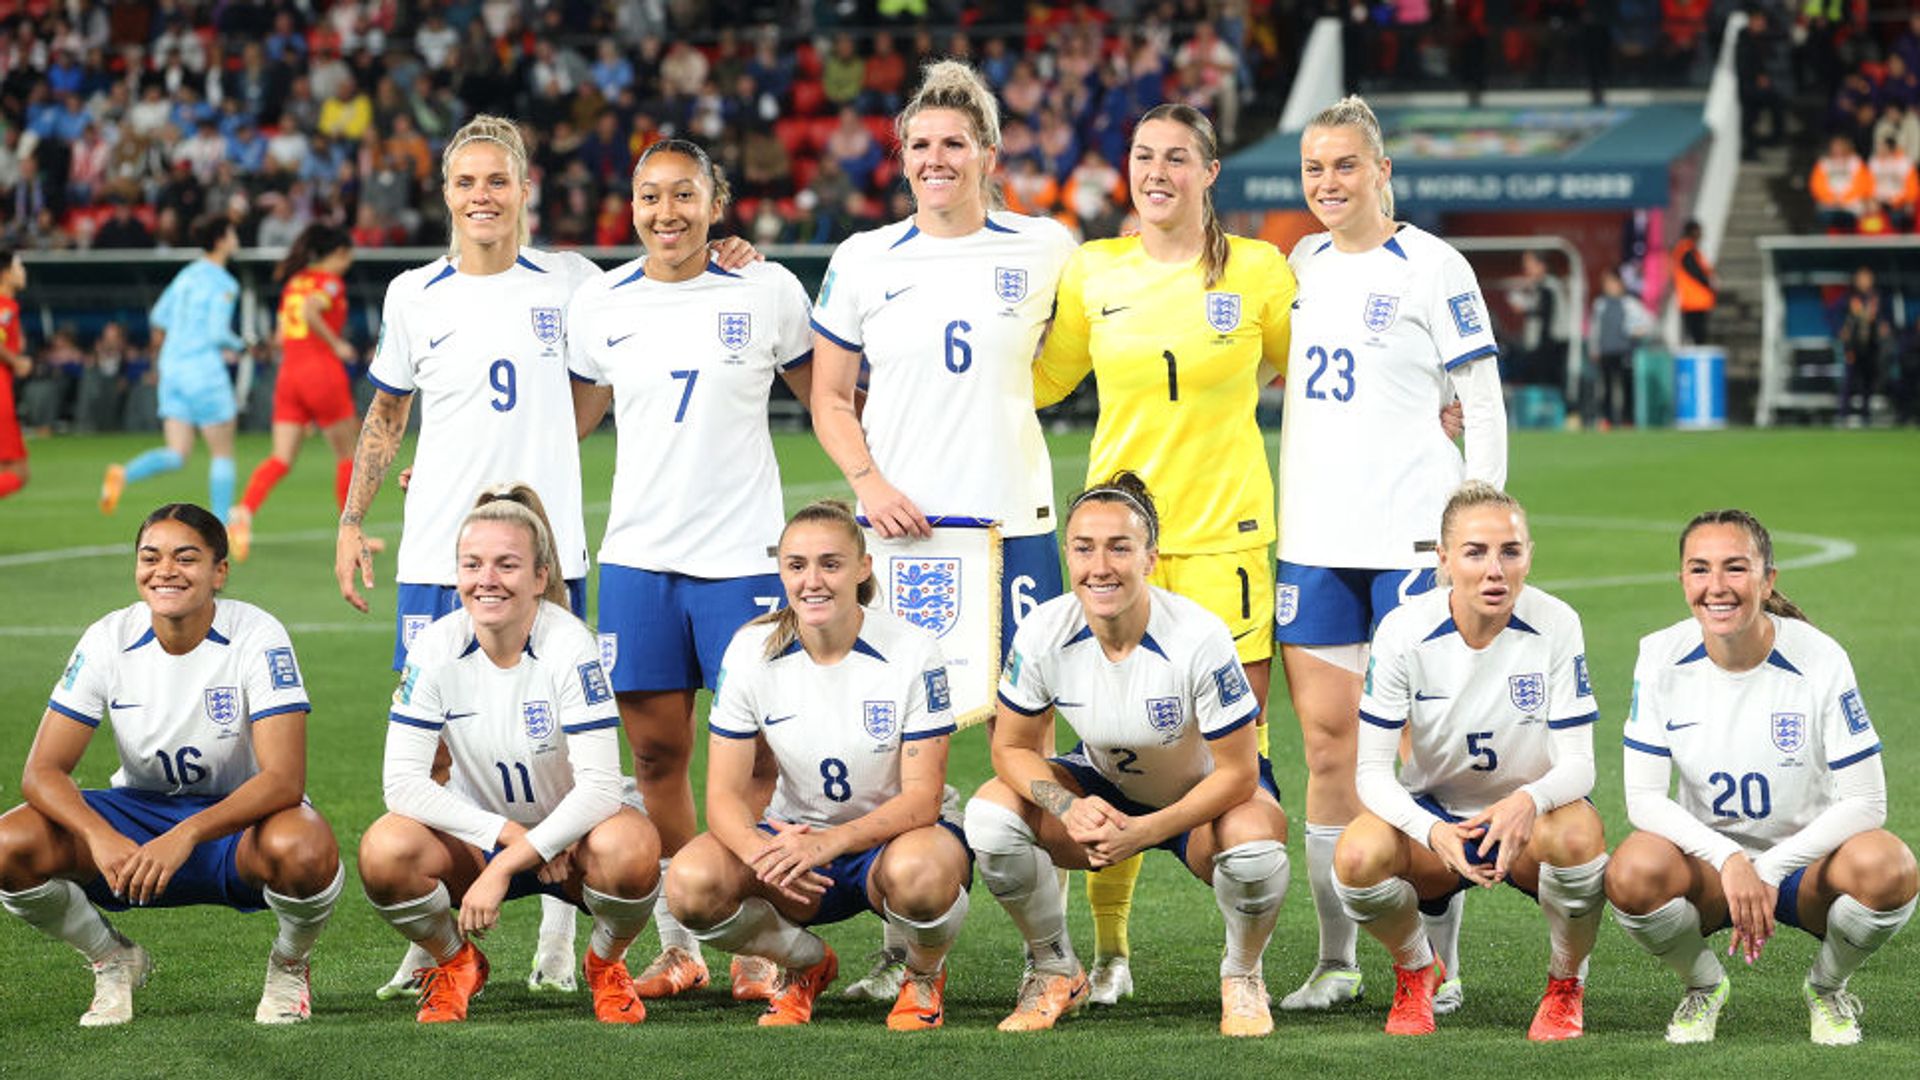 England's route to Women's World Cup final